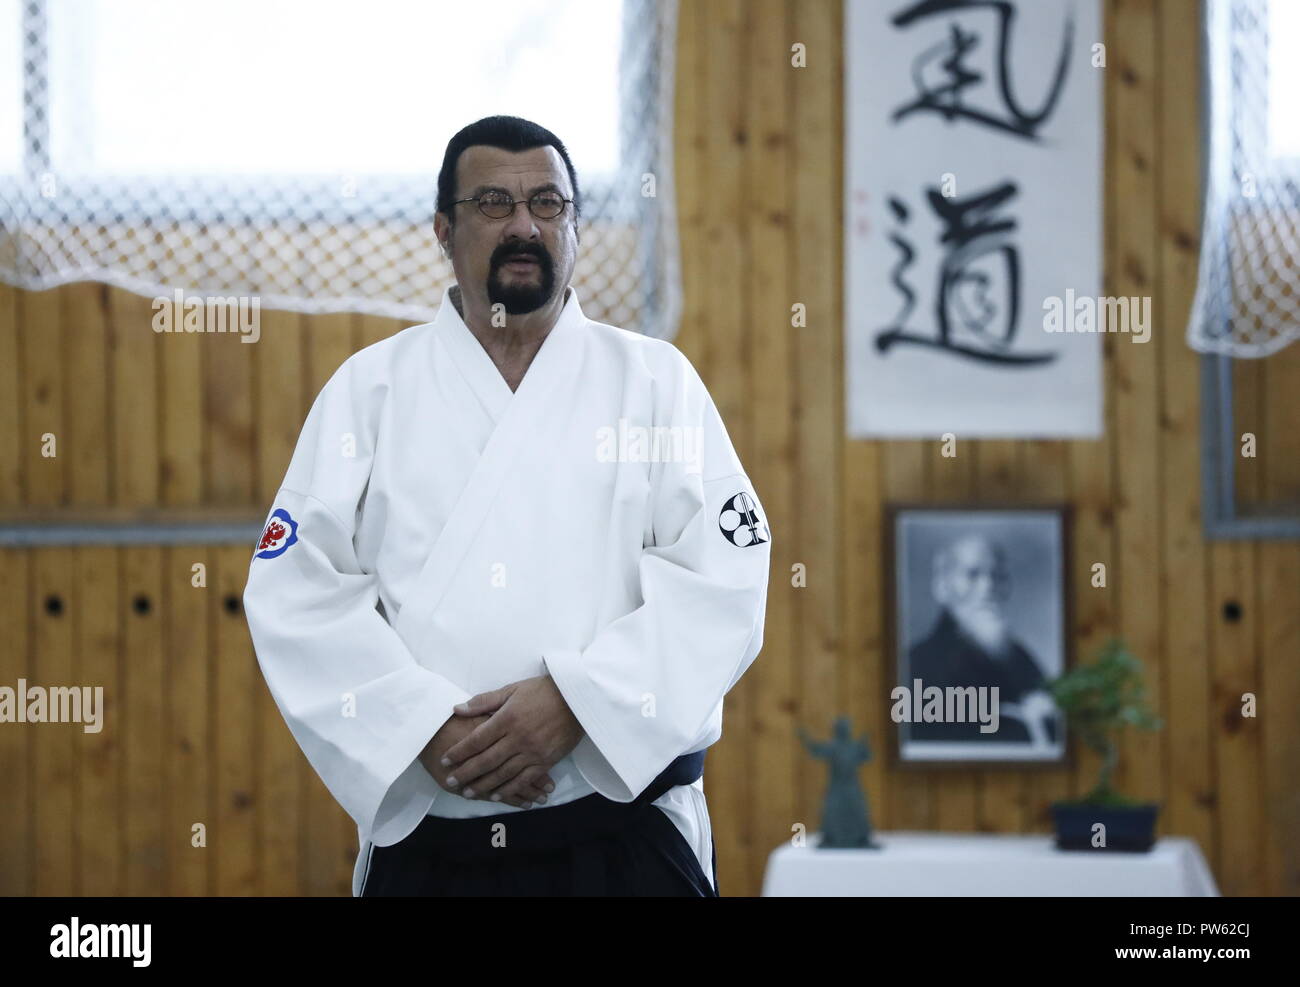 Moscow Russia 13th Oct 18 Moscow Russia October 13 18 Us Actor Steven Seagal Gives An Aikido Masterclass At Fili Sports Complex The Event Is Part Of The 1st International Budo